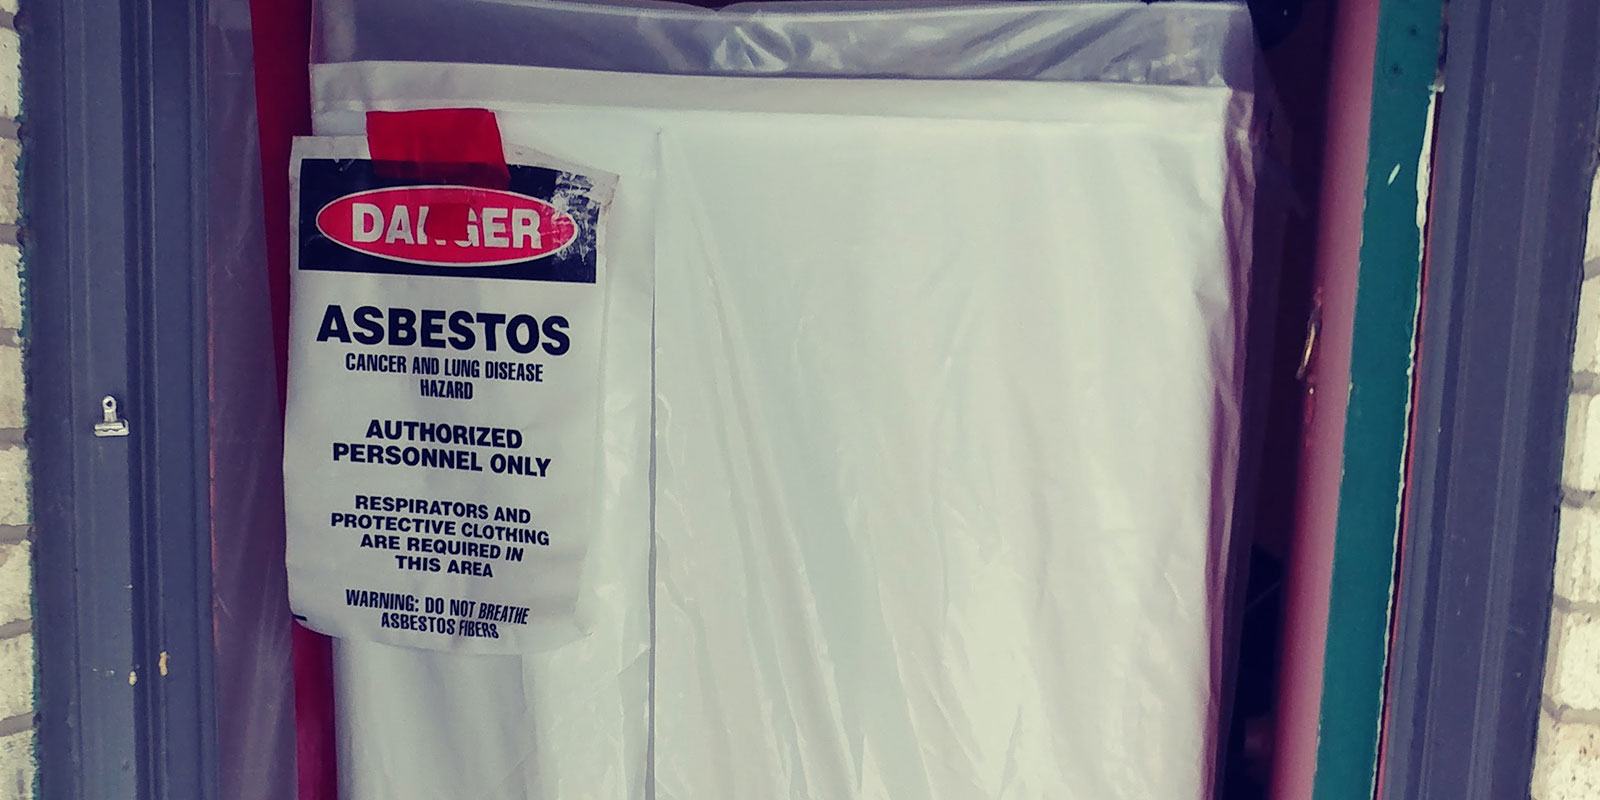 Don't put your life at risk, let our professionals remove any trace of asbestos 